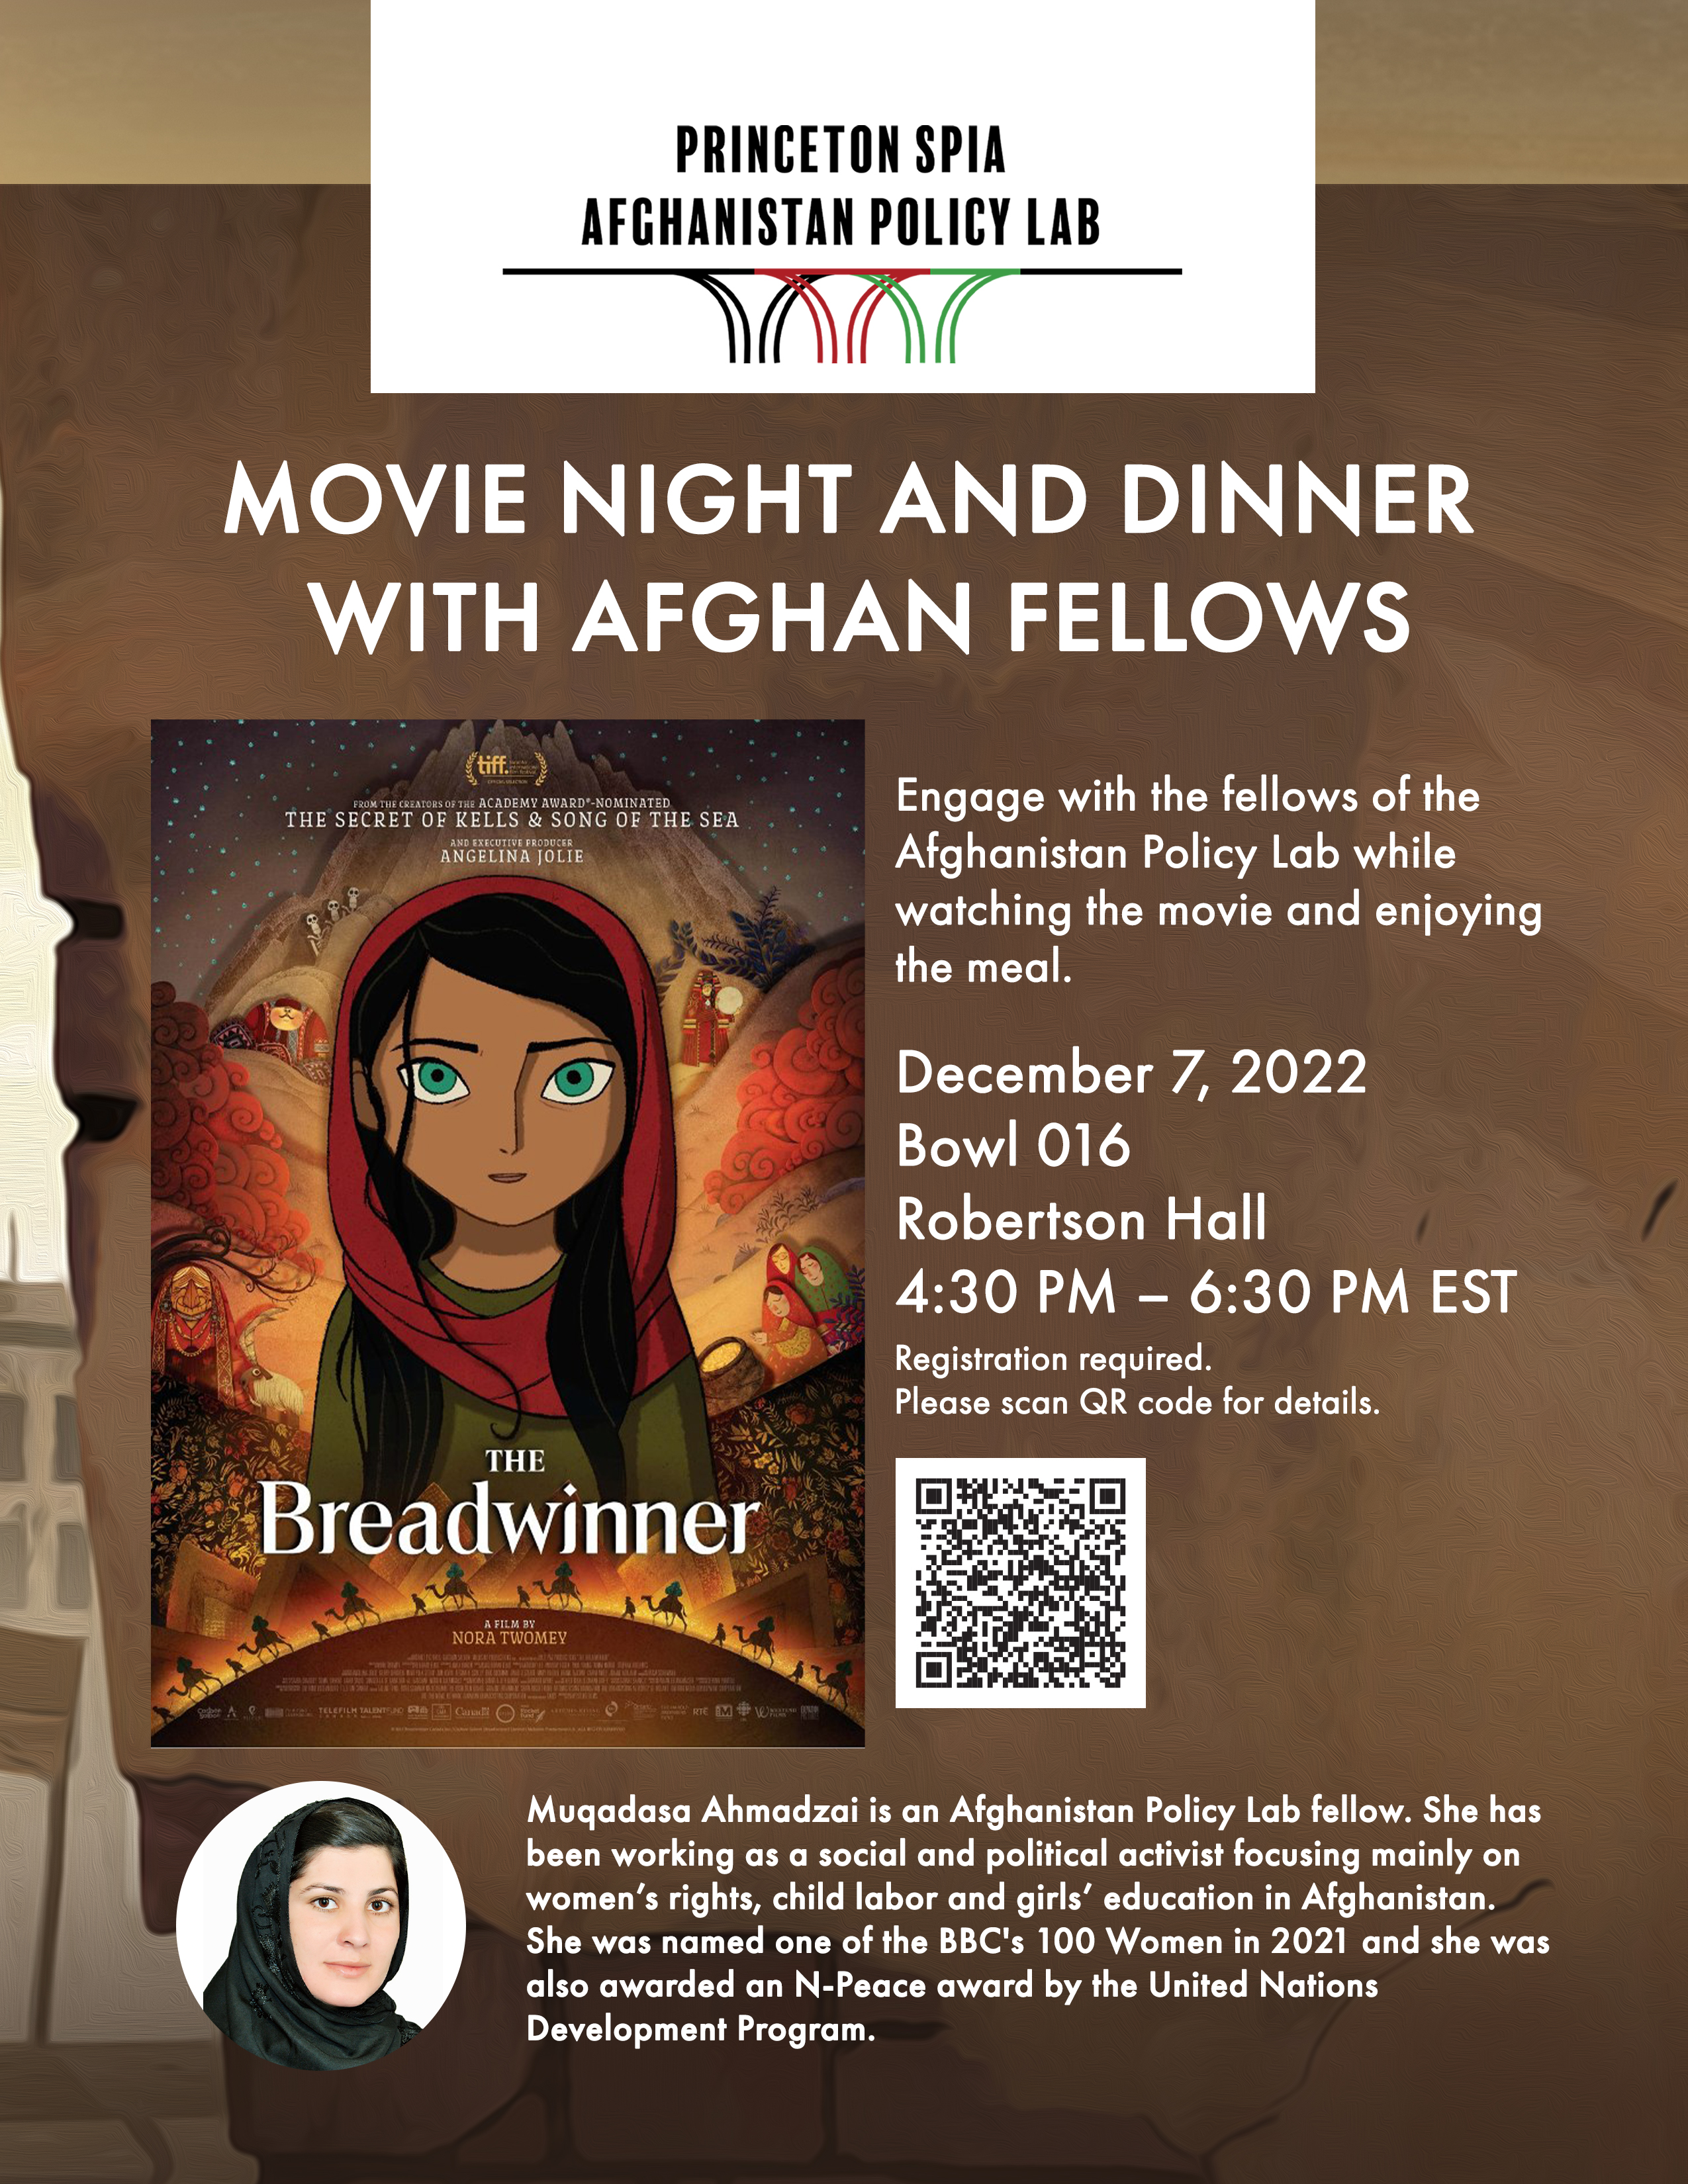 "The Breadwinner" Movie Night and Dinner with Afghan Fellows event poster